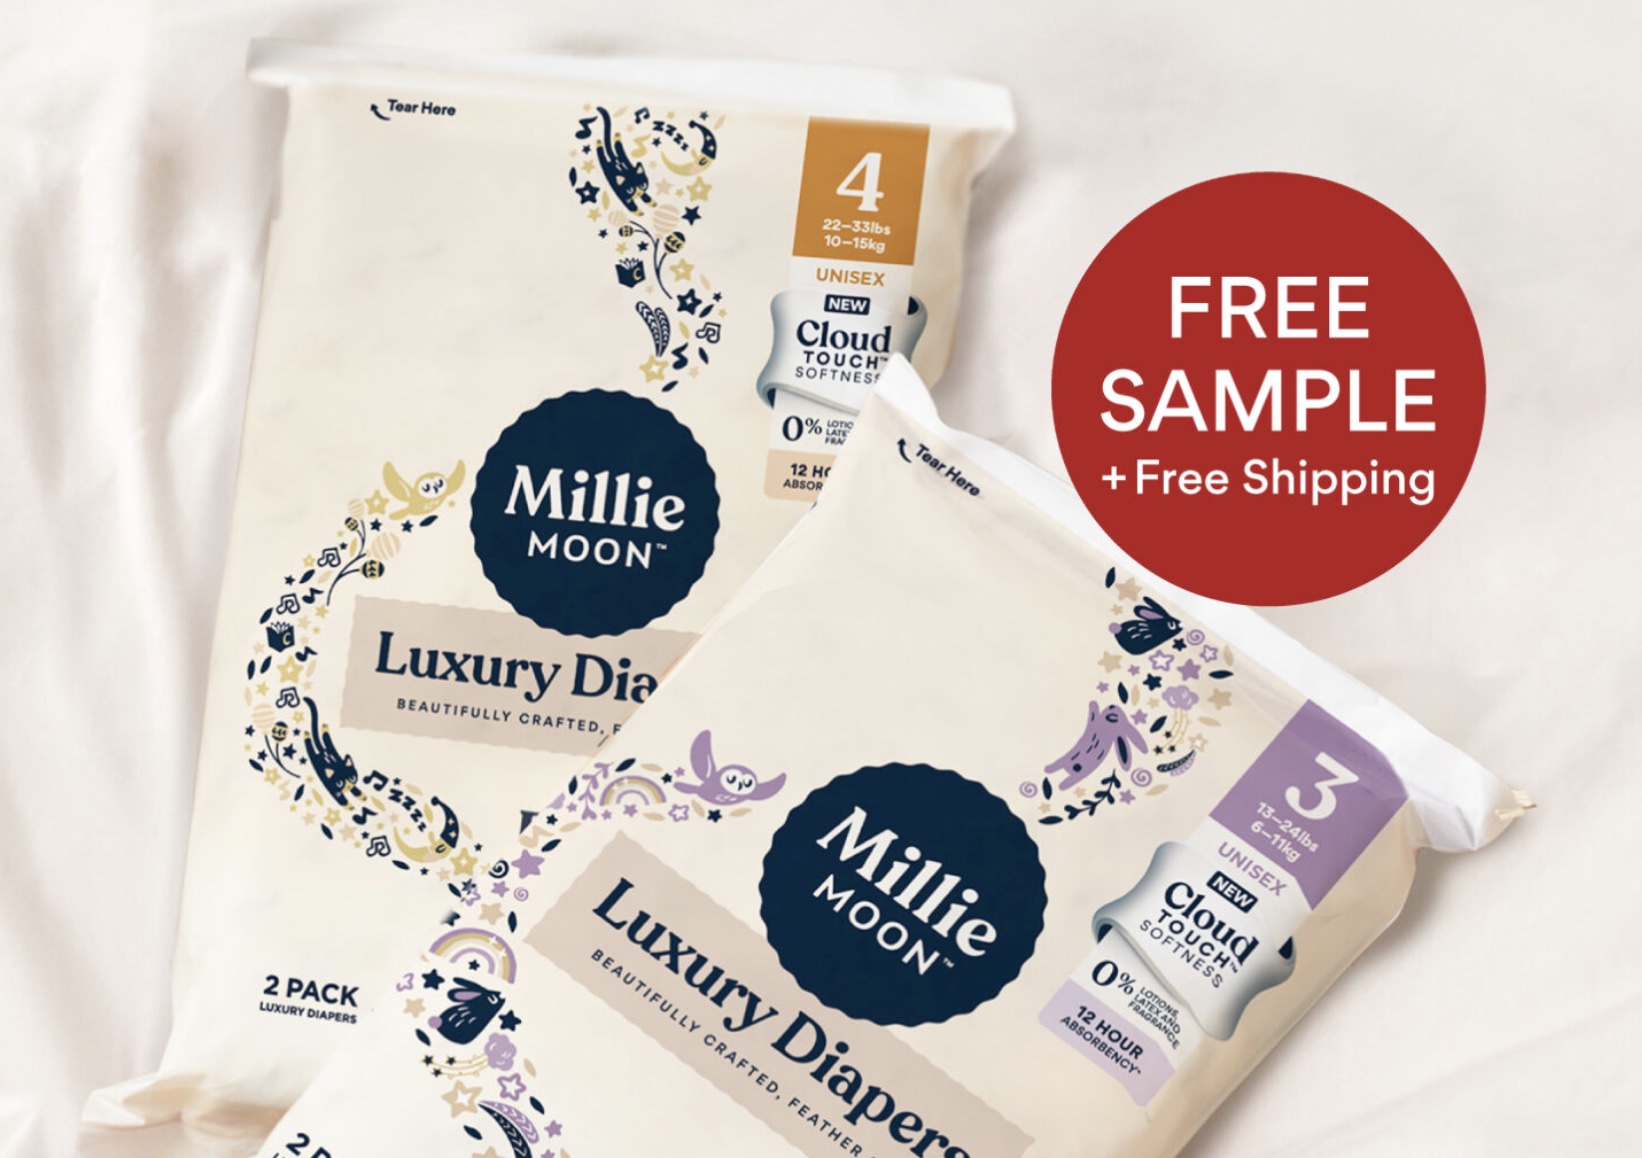 Free Baby Stuff - Must Have Free Baby Samples (Worth $2,100+!) - The Frugal  Navy Wife